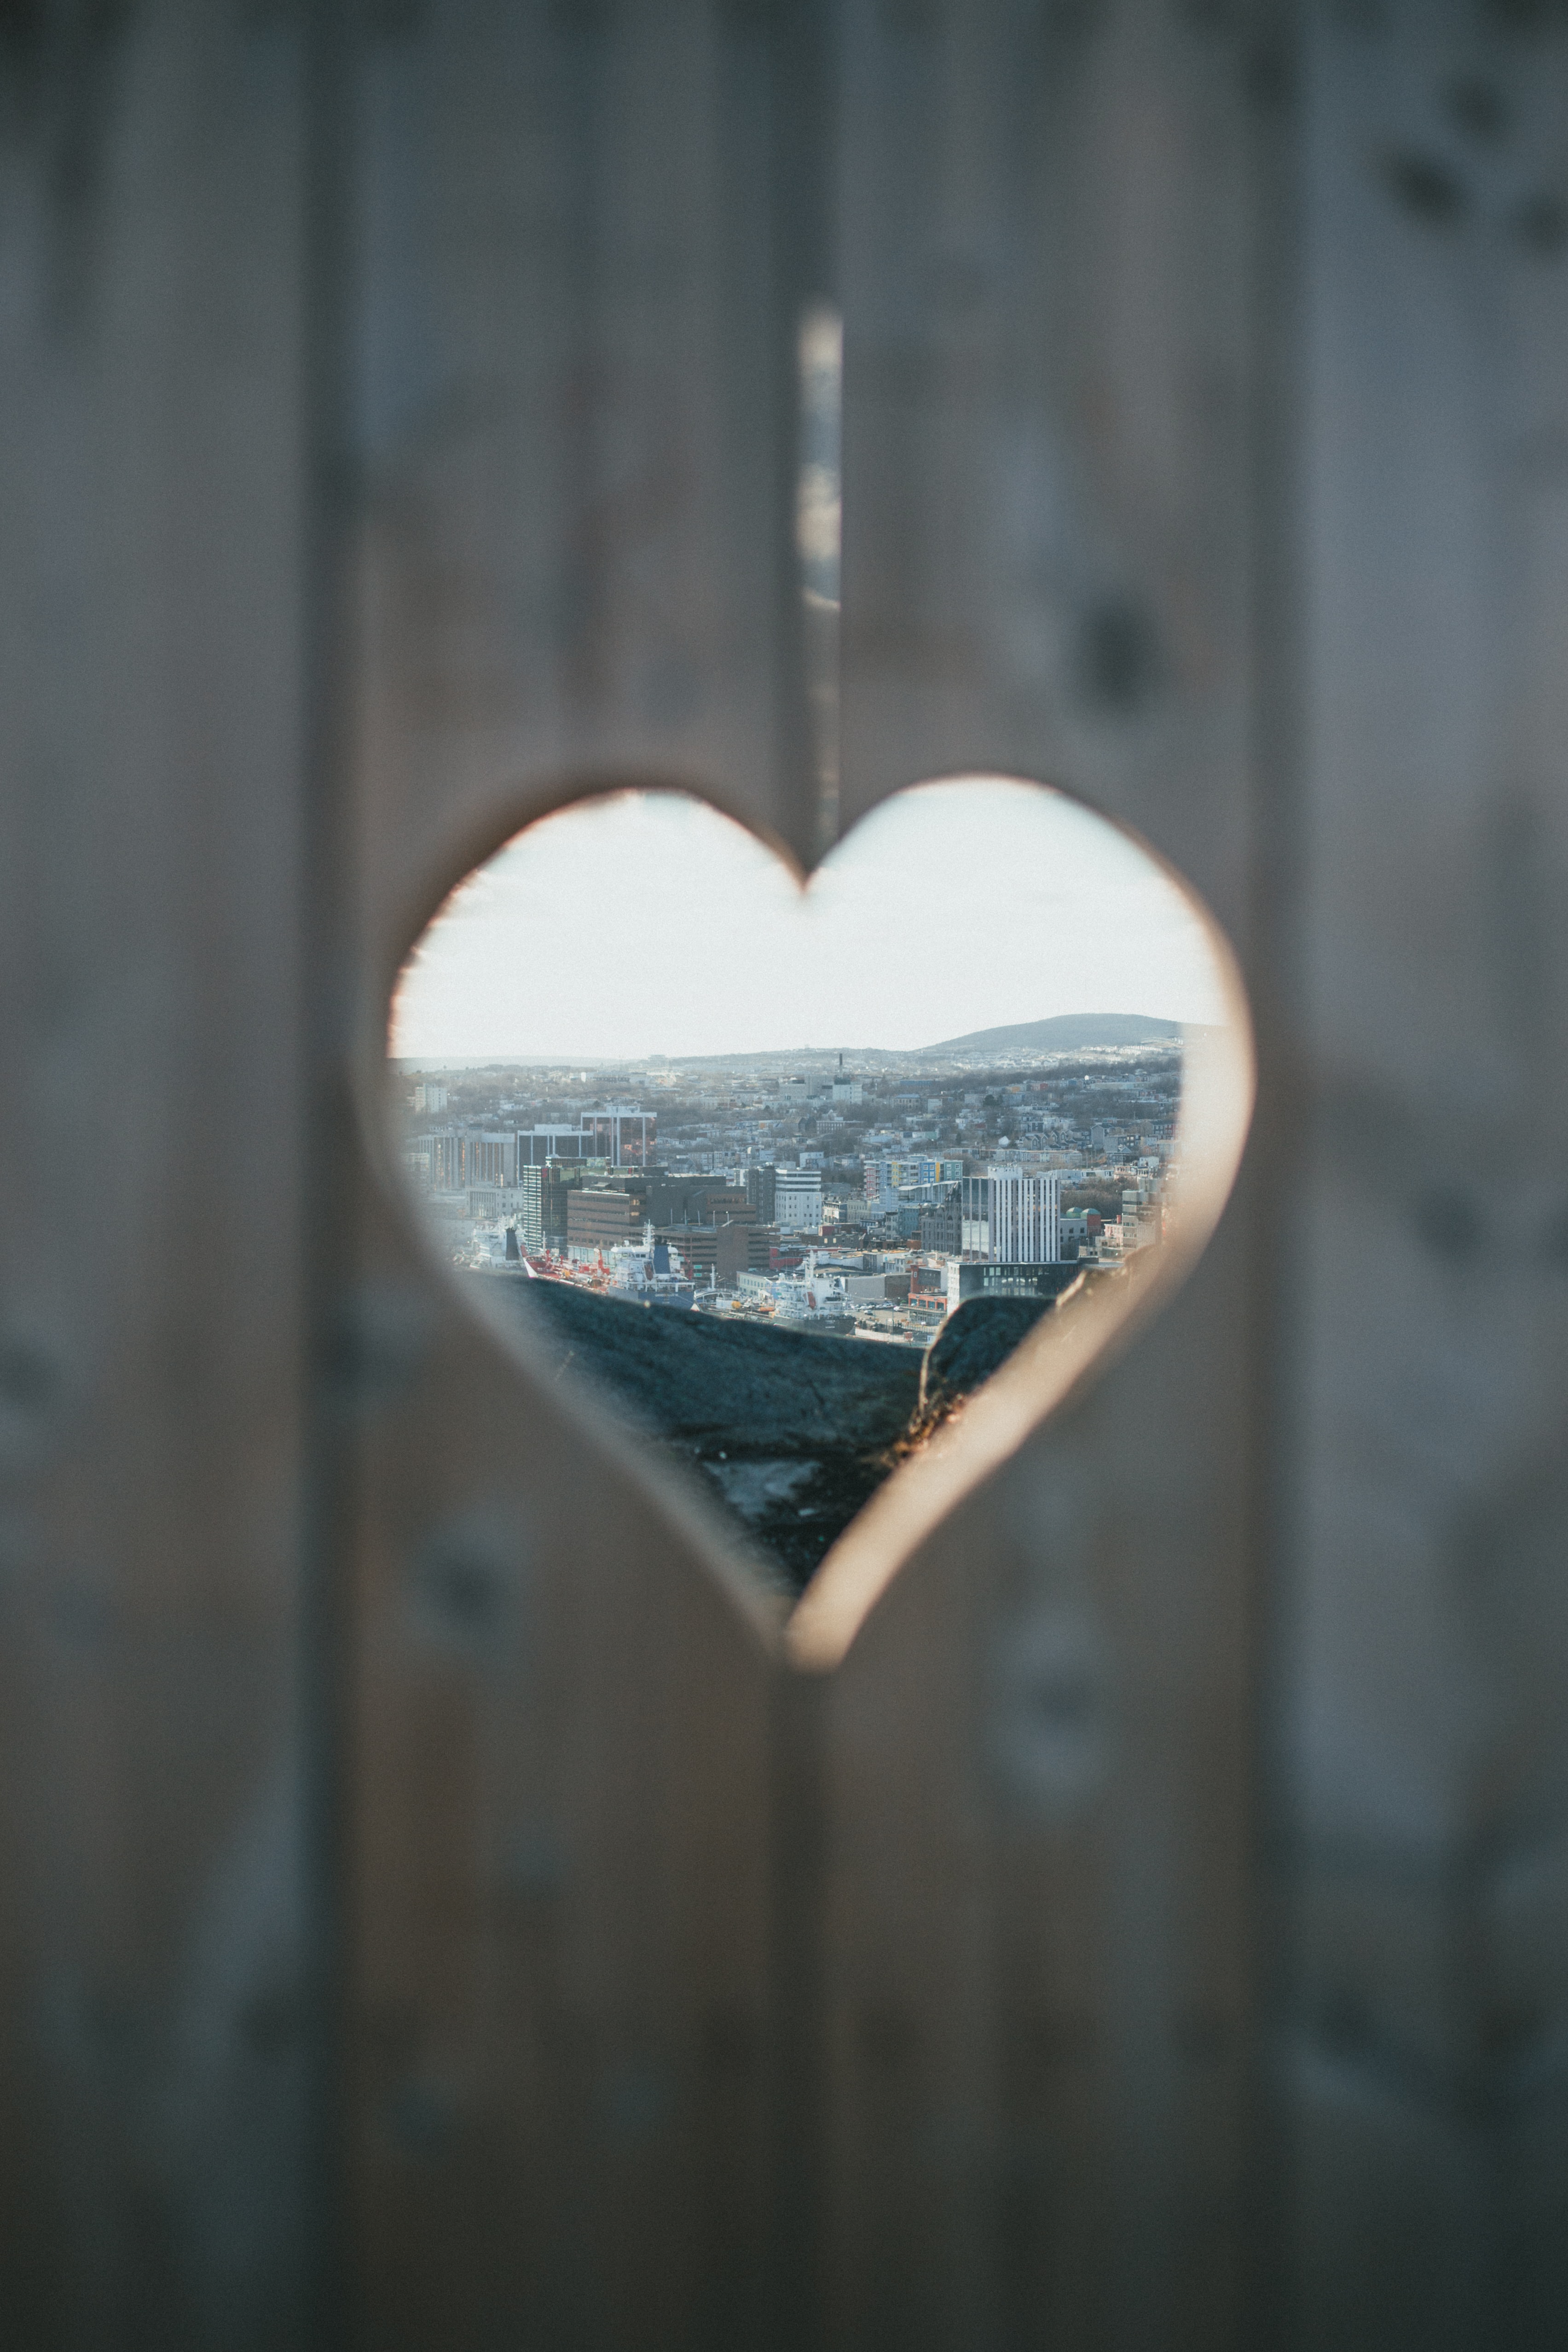 cities, city, view, heart, hole